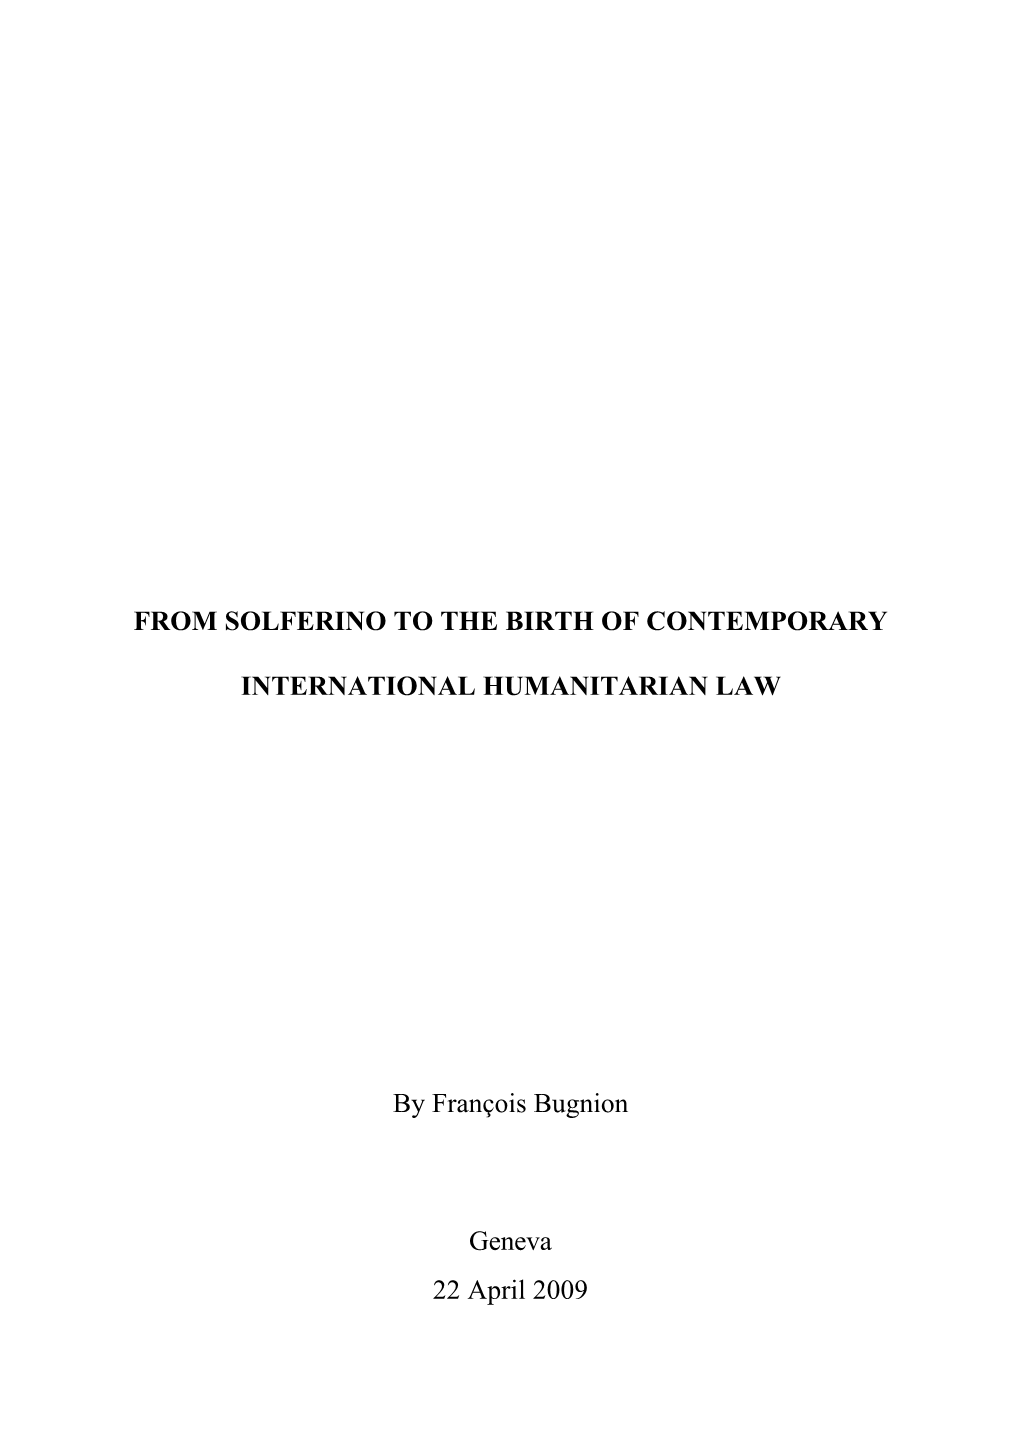 From Solferino to the Birth of Contemporary International Humanitarian Law